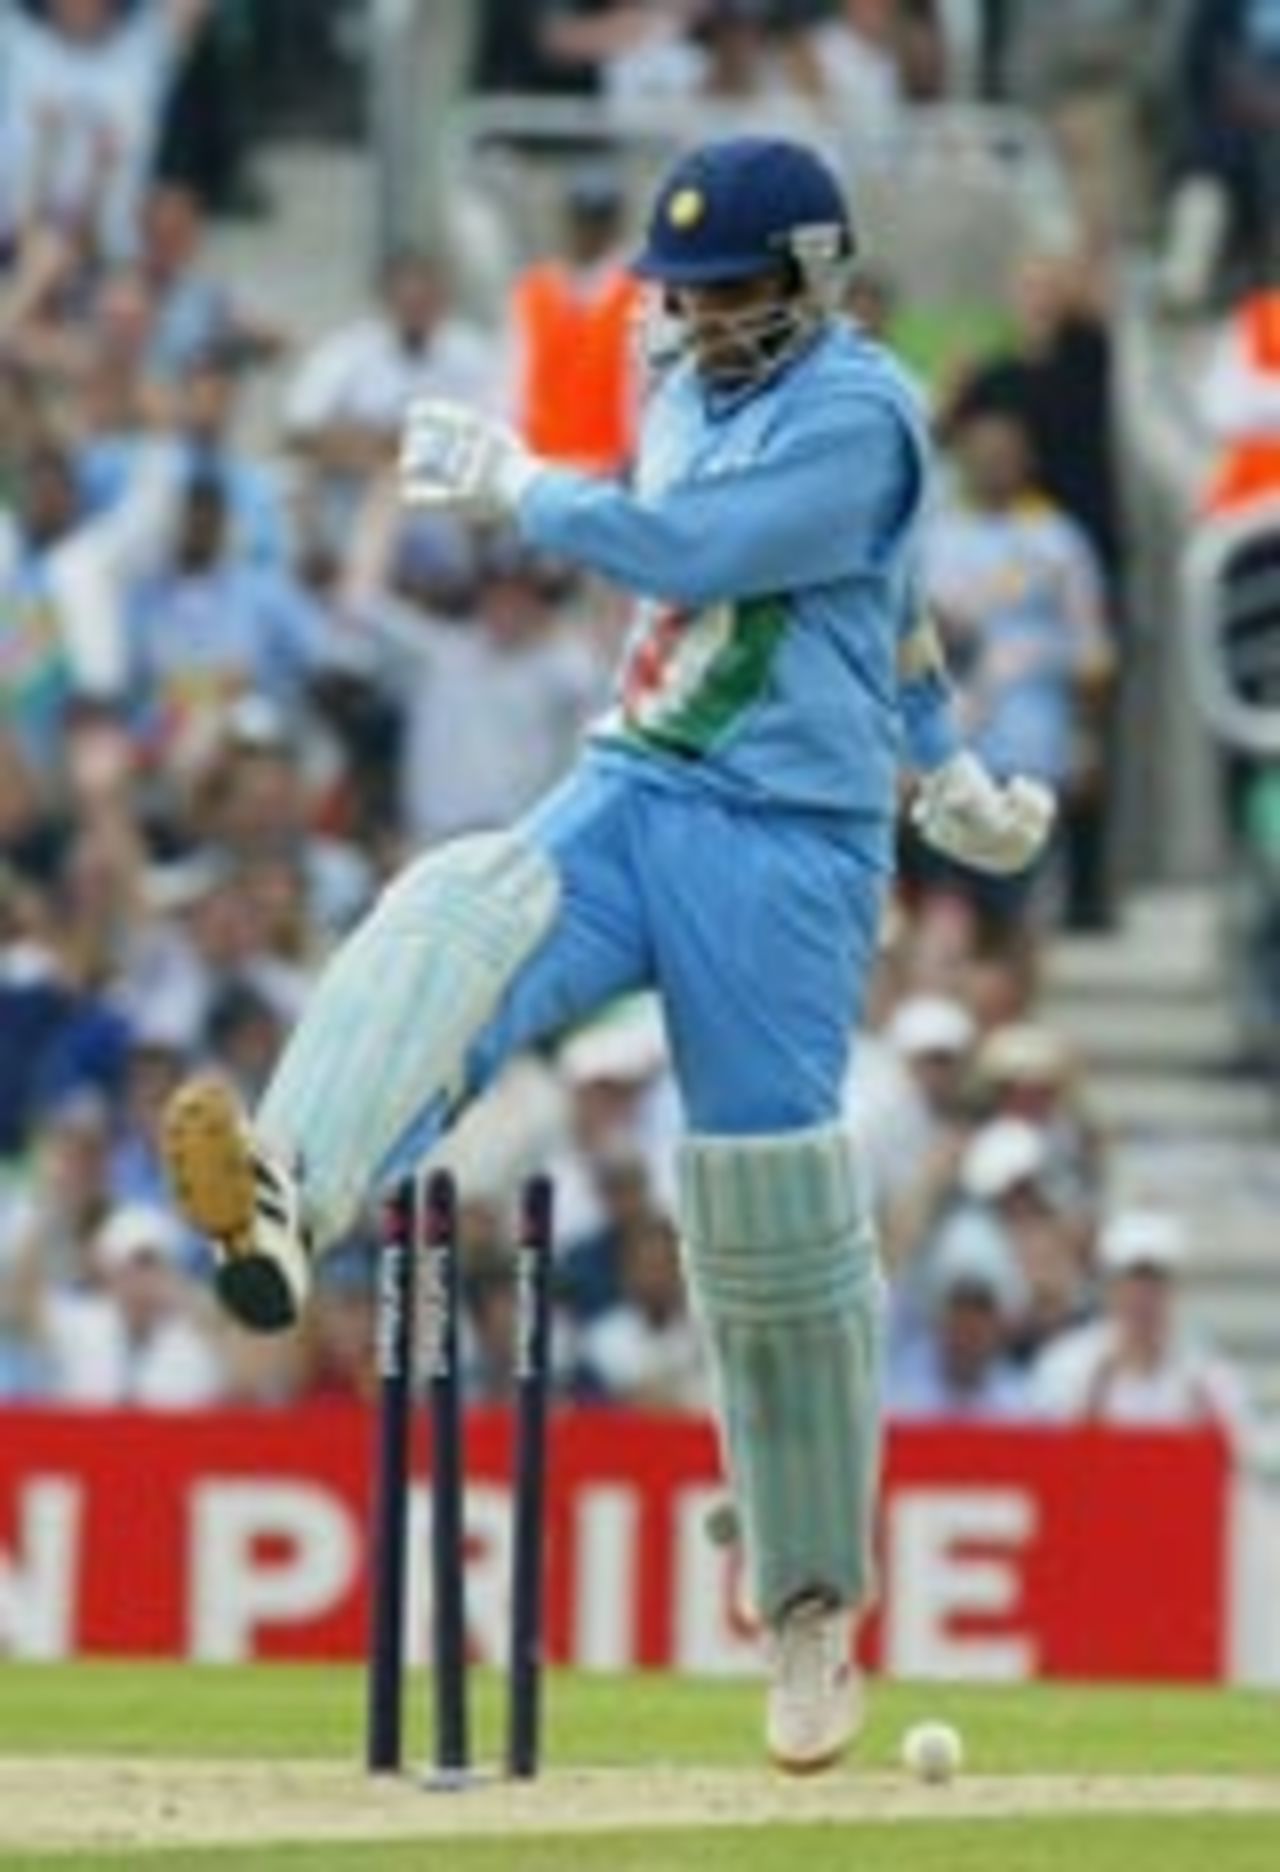 Sourav Ganguly vents his frustrations after being run out, England v India, NatWest Challenge, September 3 2004